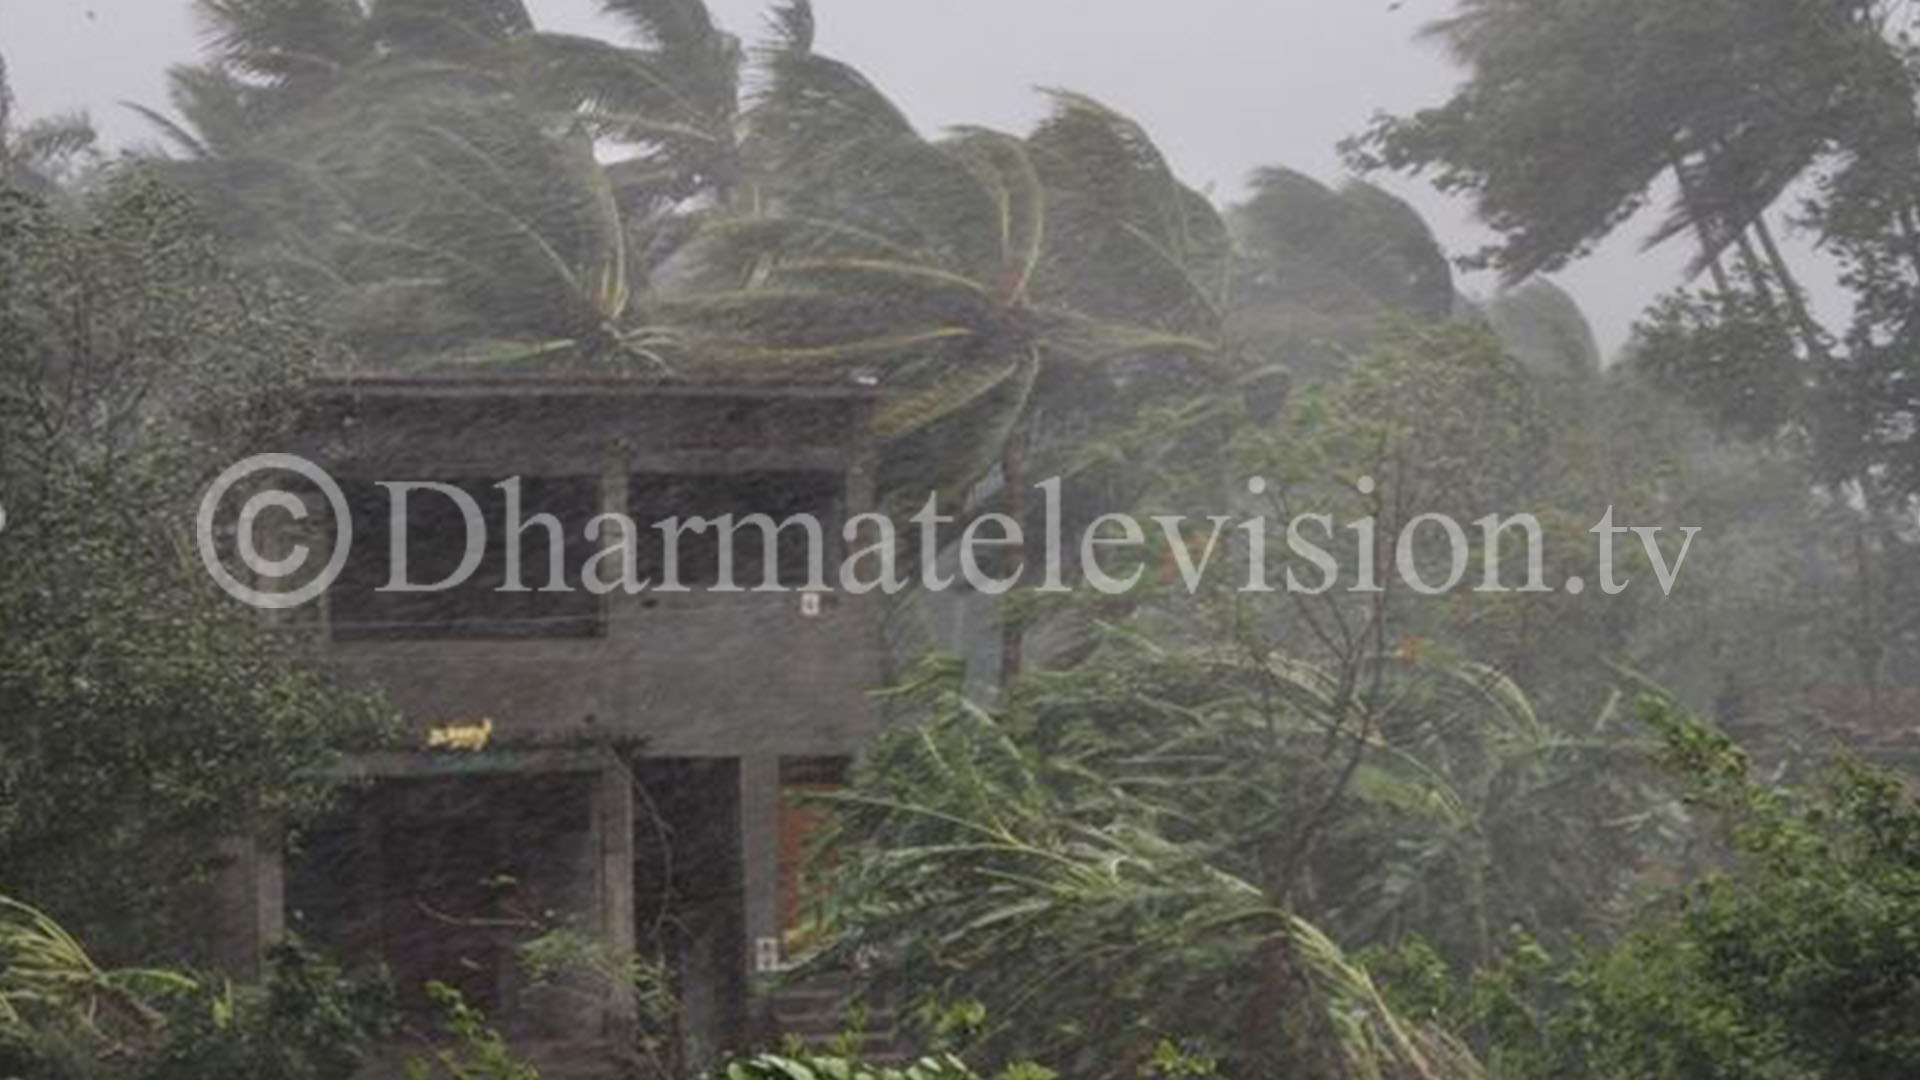 At least 82 in India and Bangladesh killed by Cyclone